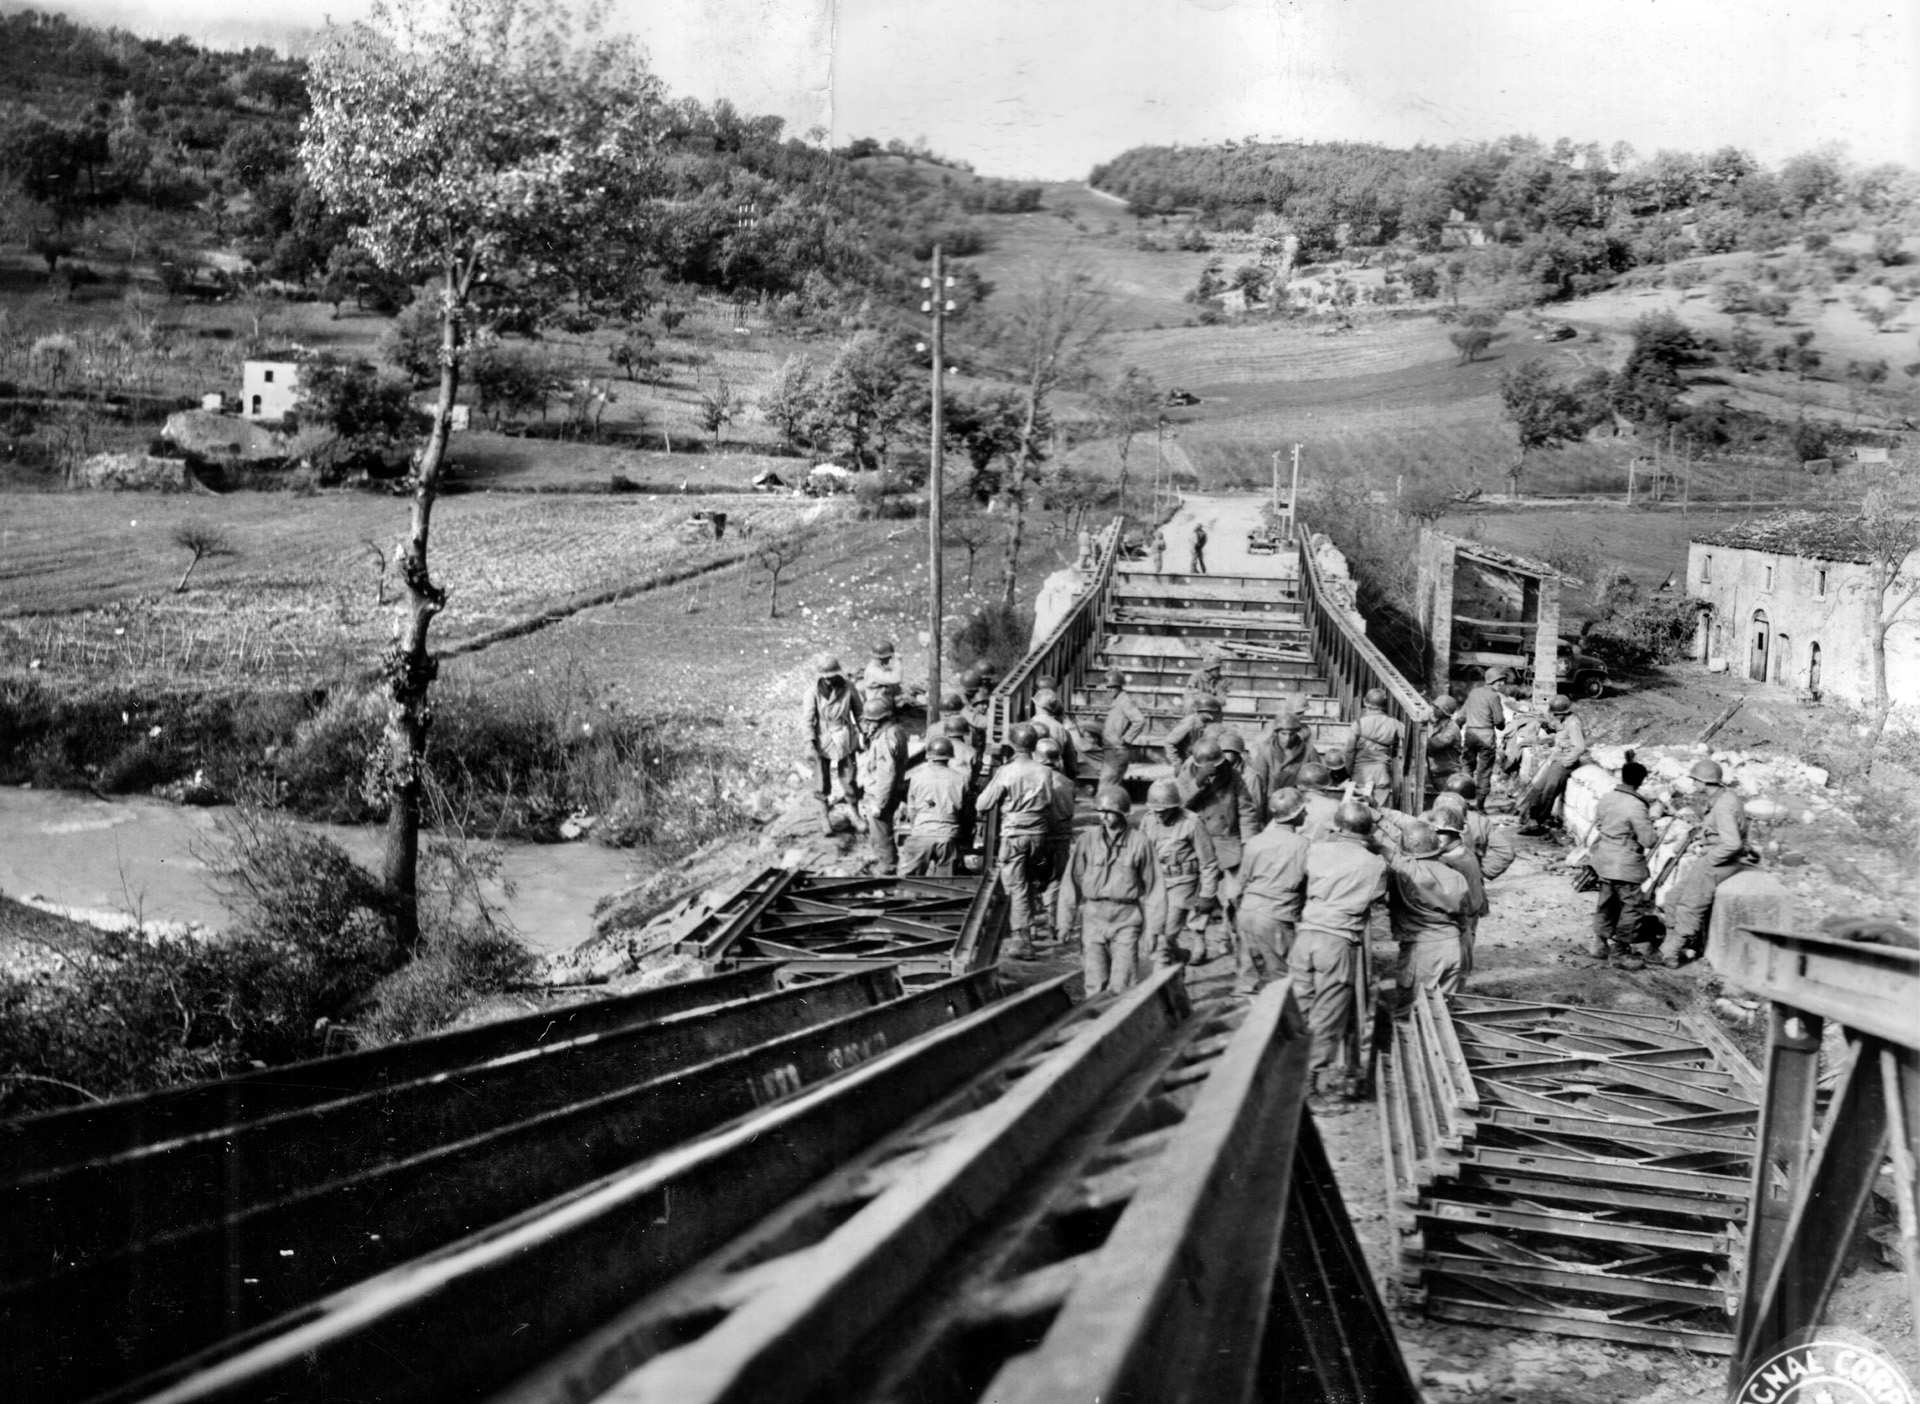 Soldiers of the 48th Engineer Combat Battalion work to repair a bridge and road connection during the Italian campaign. The soldiers of the 48th were later called upon to fight as infantry during the assault on Mount Porchia.